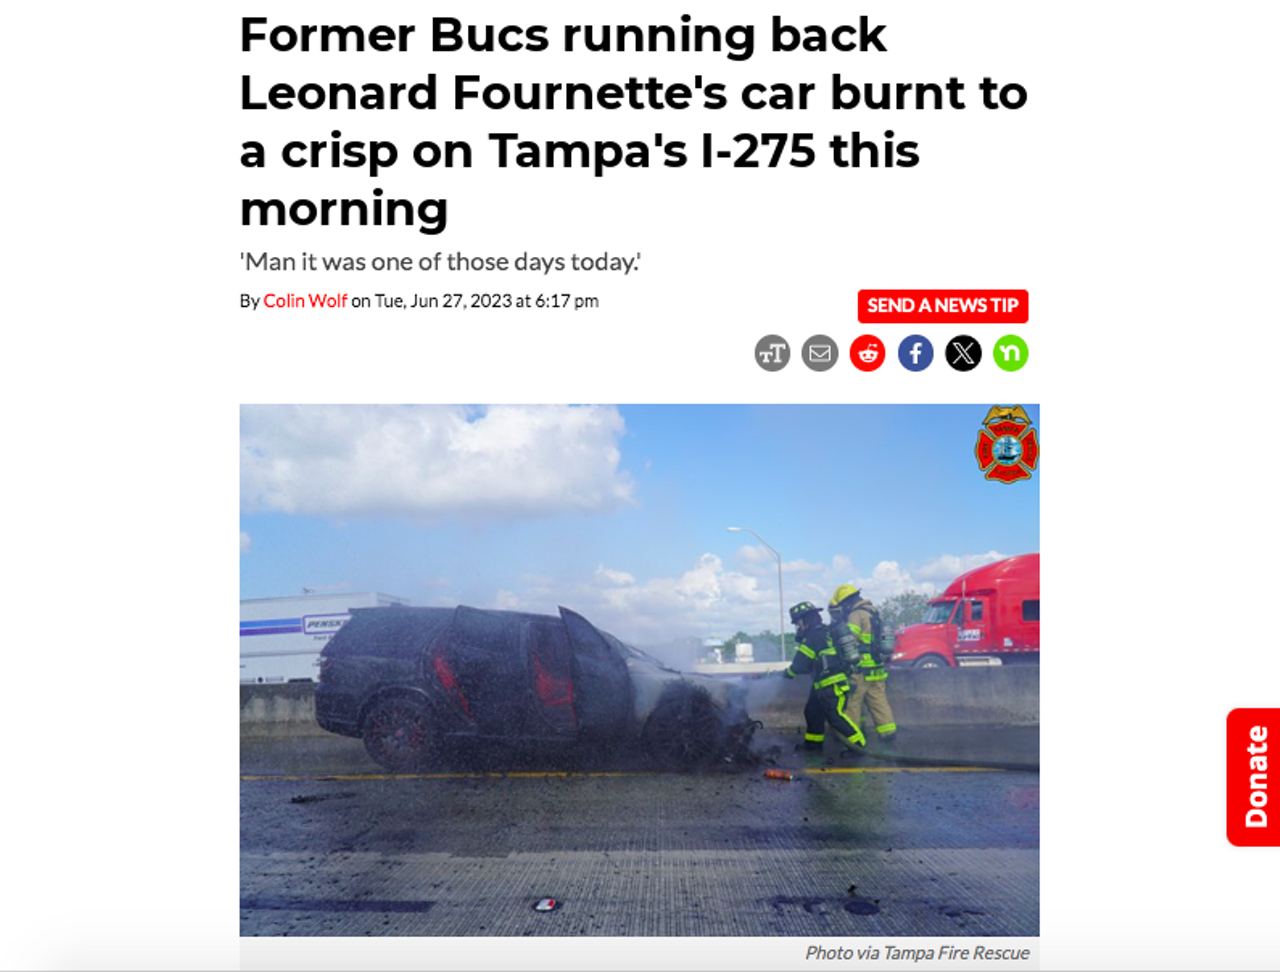 Super Bowl Lenny had a close call last summer, after the former Buccaneer's car caught fire.  "Man it was one of those days today, but I would like thank God, my car caught on fire while I was driving, But I’am still blessed," wrote Fournette on Instagram. Read the full story here.